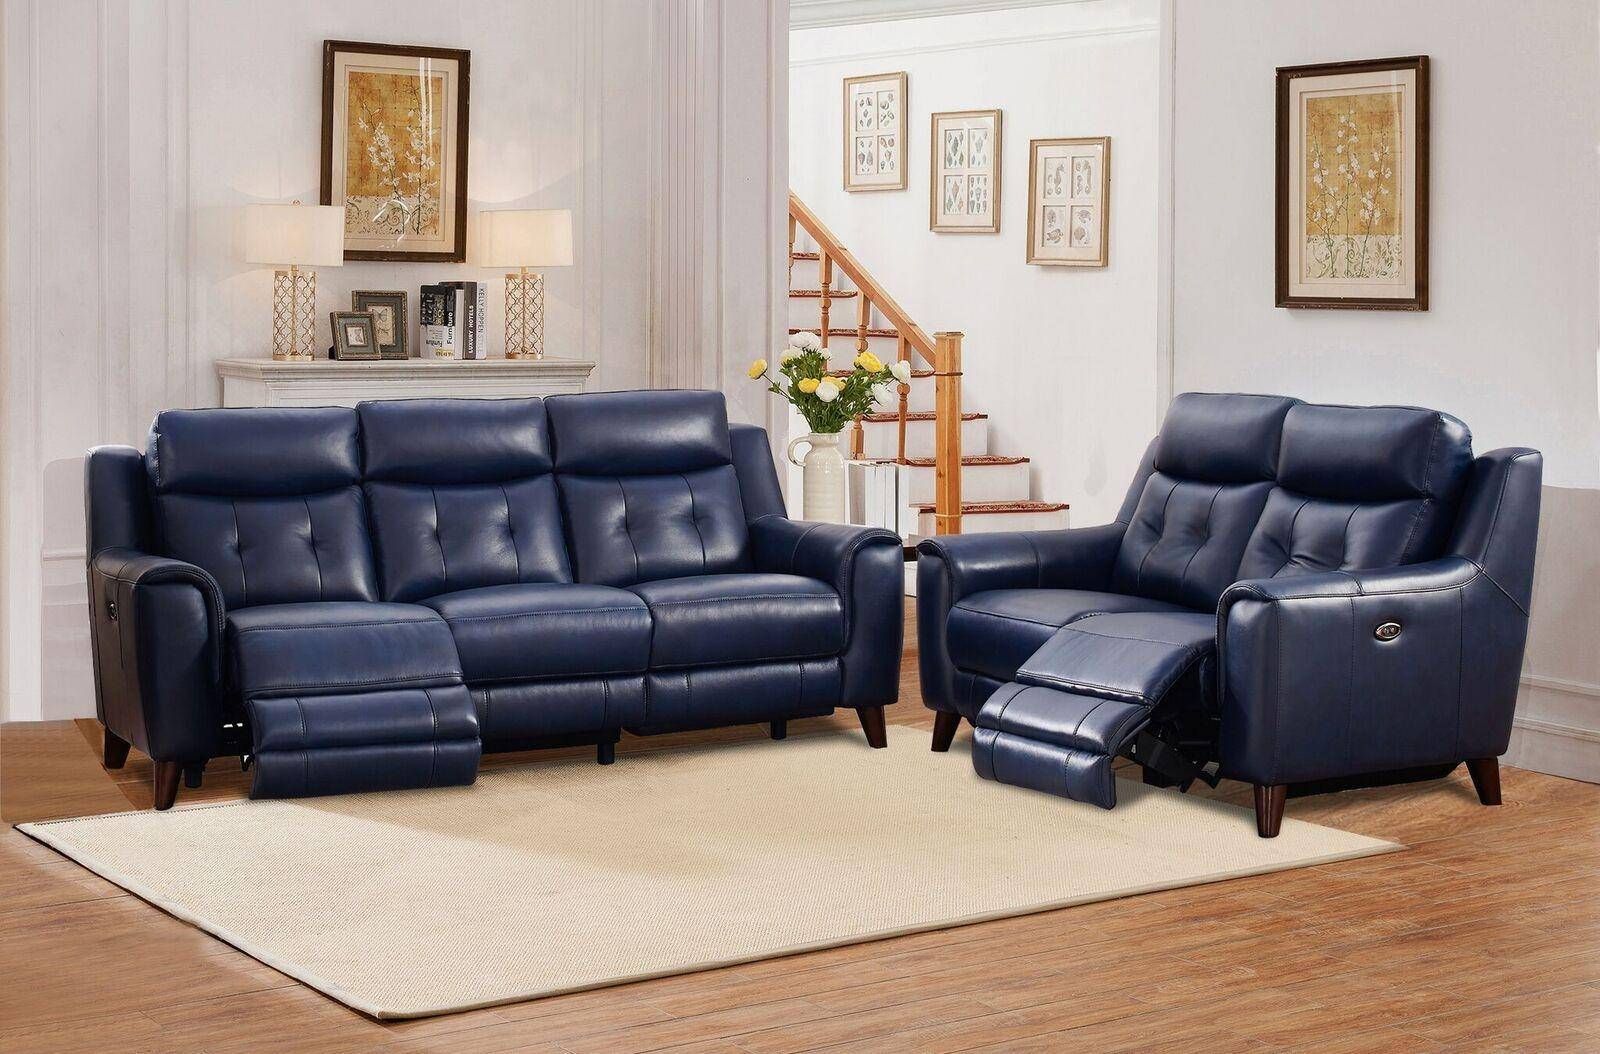 Buy Amax Hydeline Hastings Reclining Sofa Set 3 Pcs In For Bloutop Upholstered Sectional Sofas (View 11 of 15)